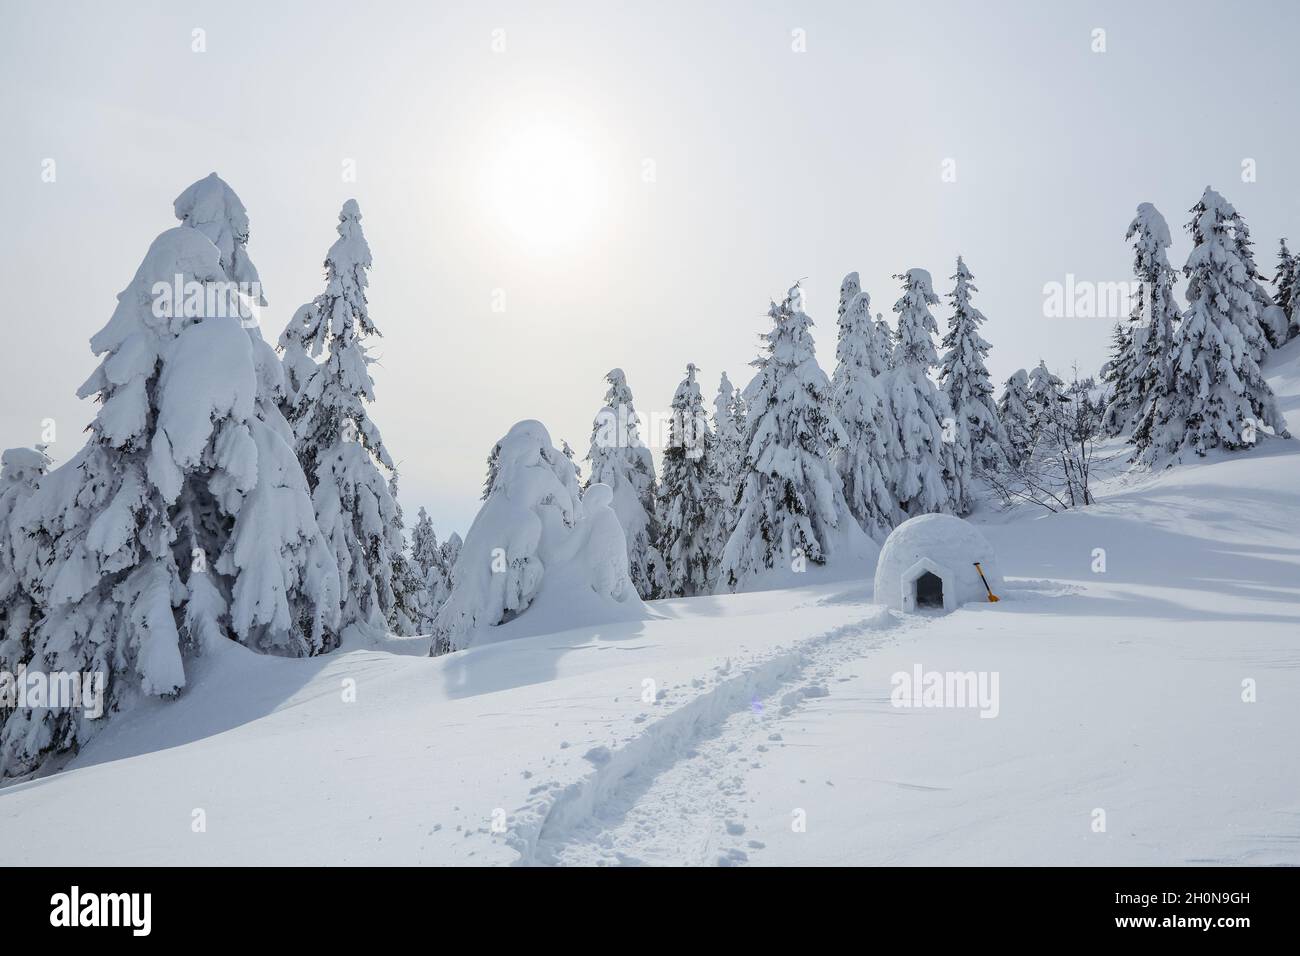 The wide trail leads to the snowy igloo. Winter mountain landscapes. Location place the Carpathian Mountains, Ukraine, Europe. Stock Photo